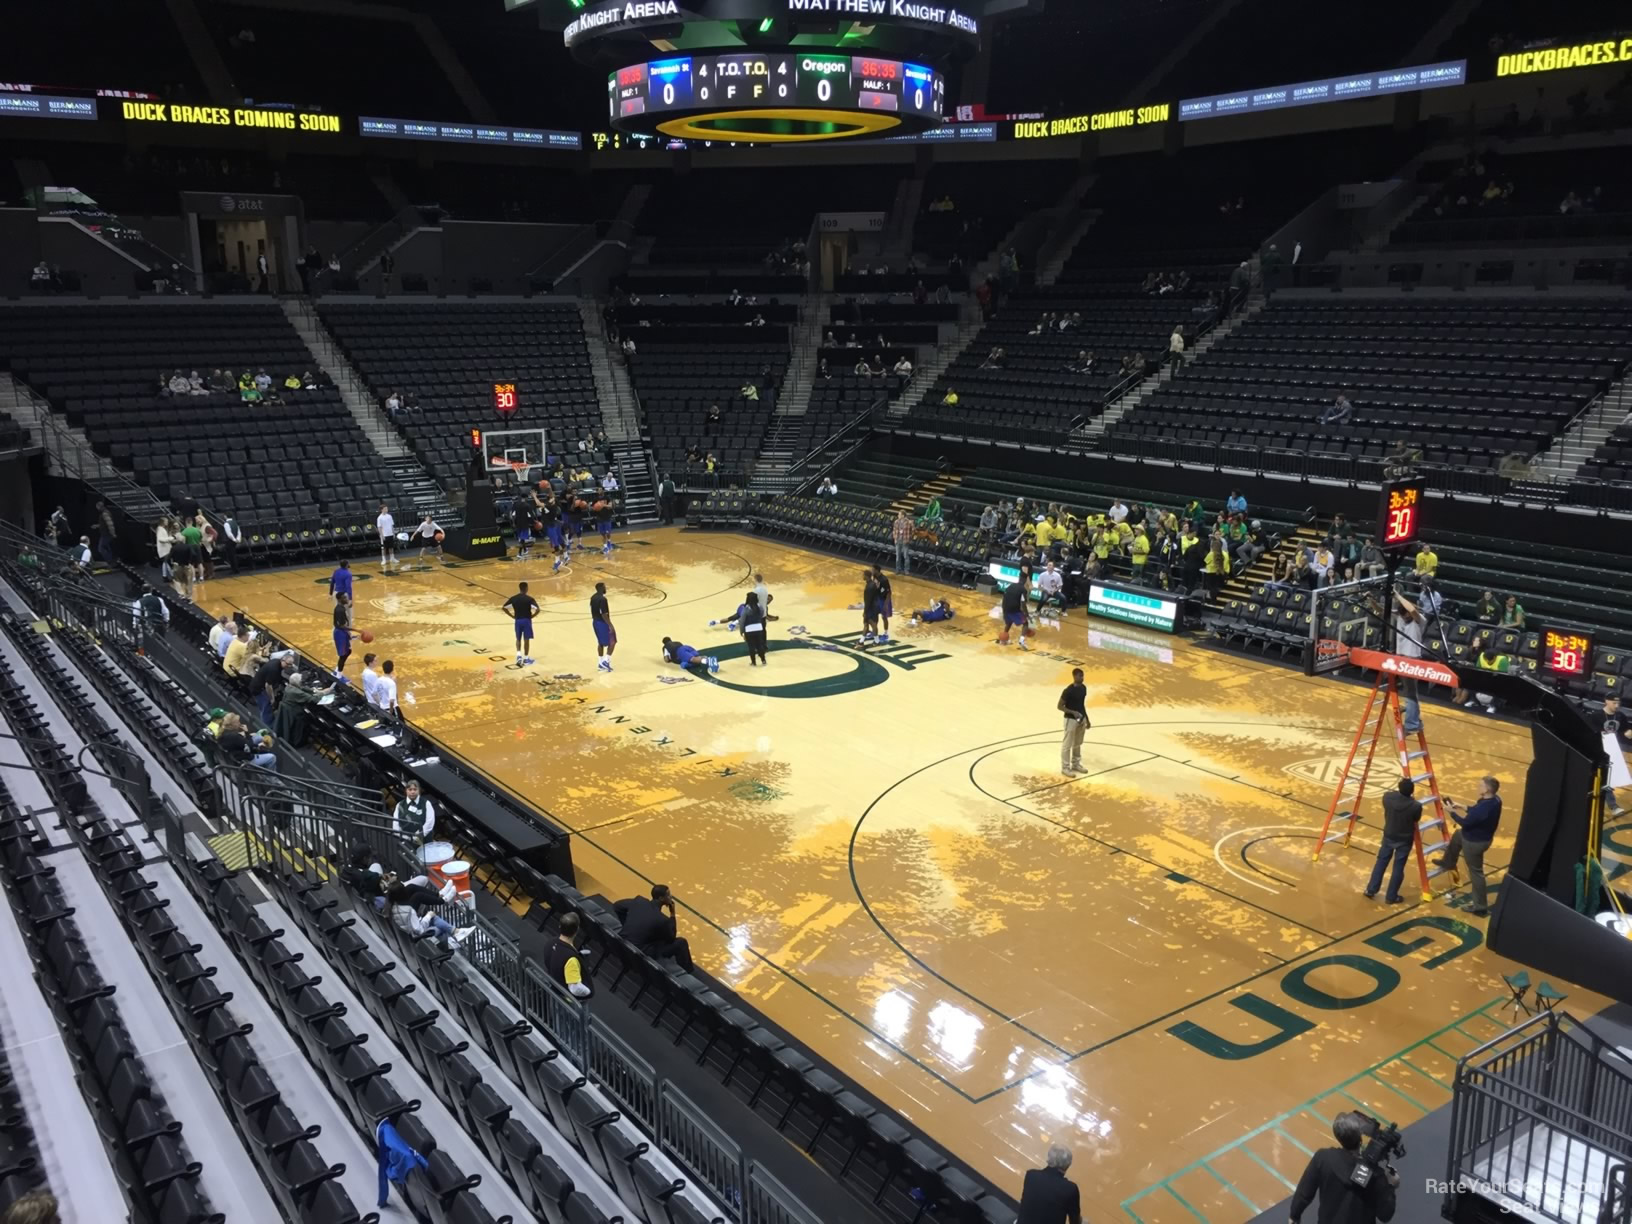 section 121, row k seat view  - matthew knight arena